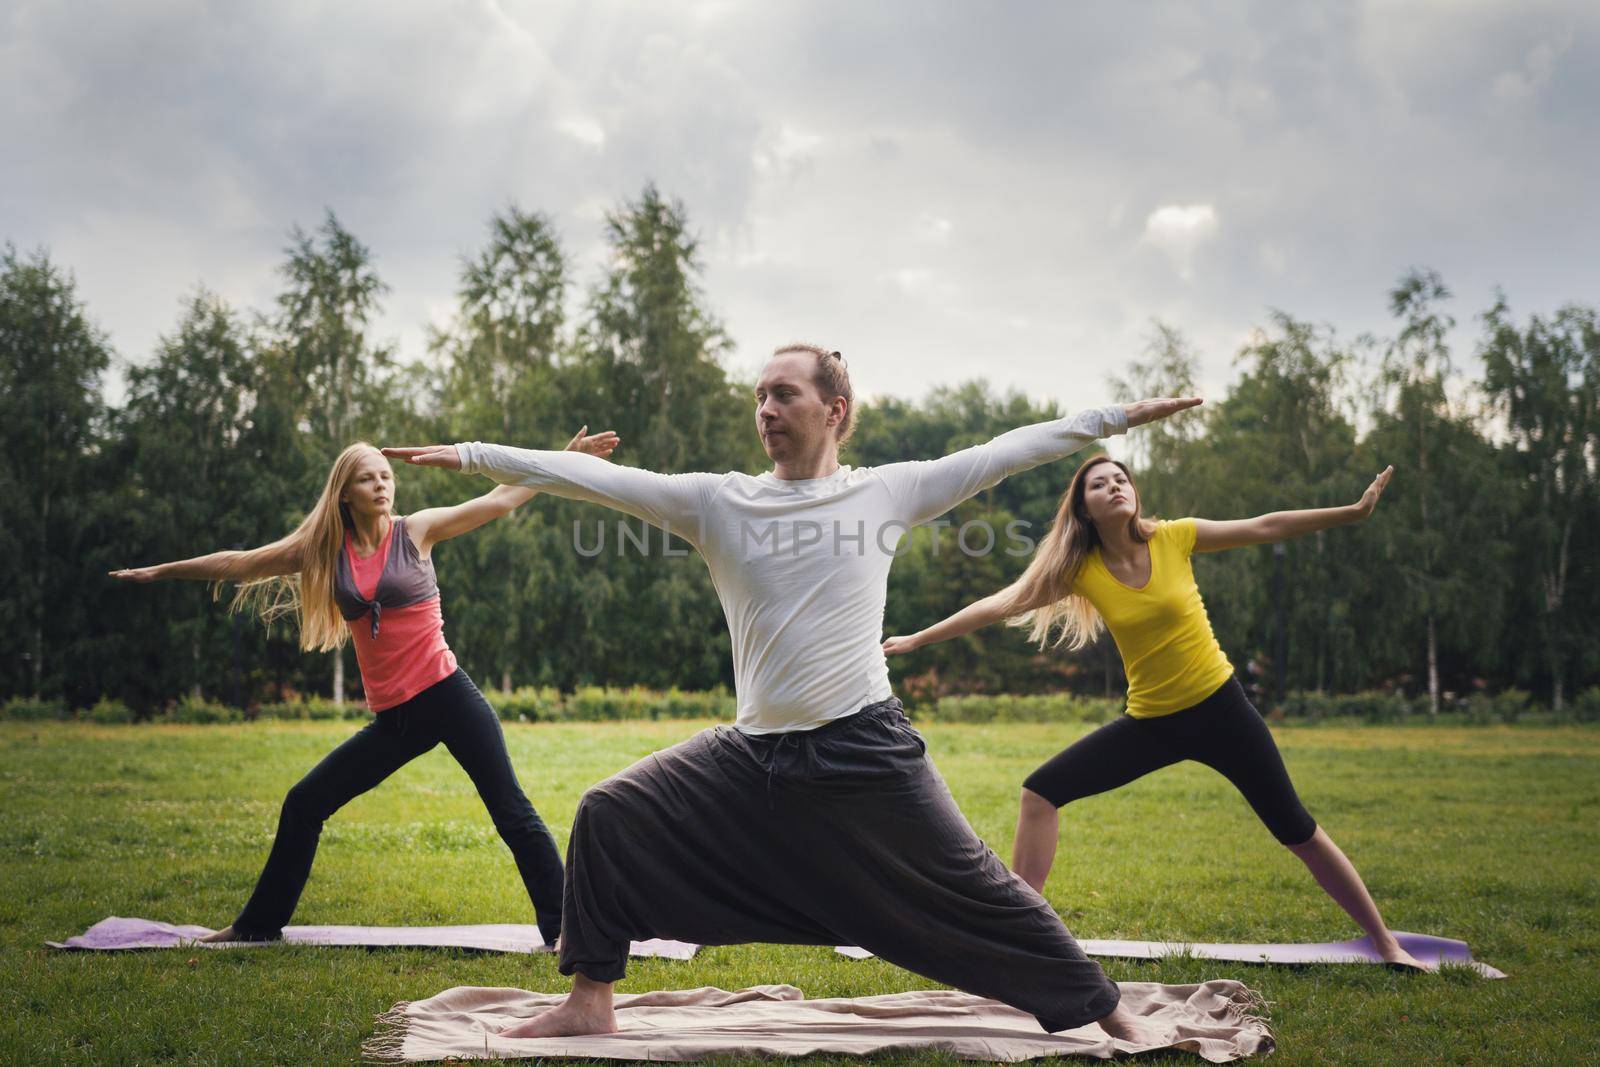 Yoga sportsmen in park - performs exercise outdoors outdoor at morning by Studia72